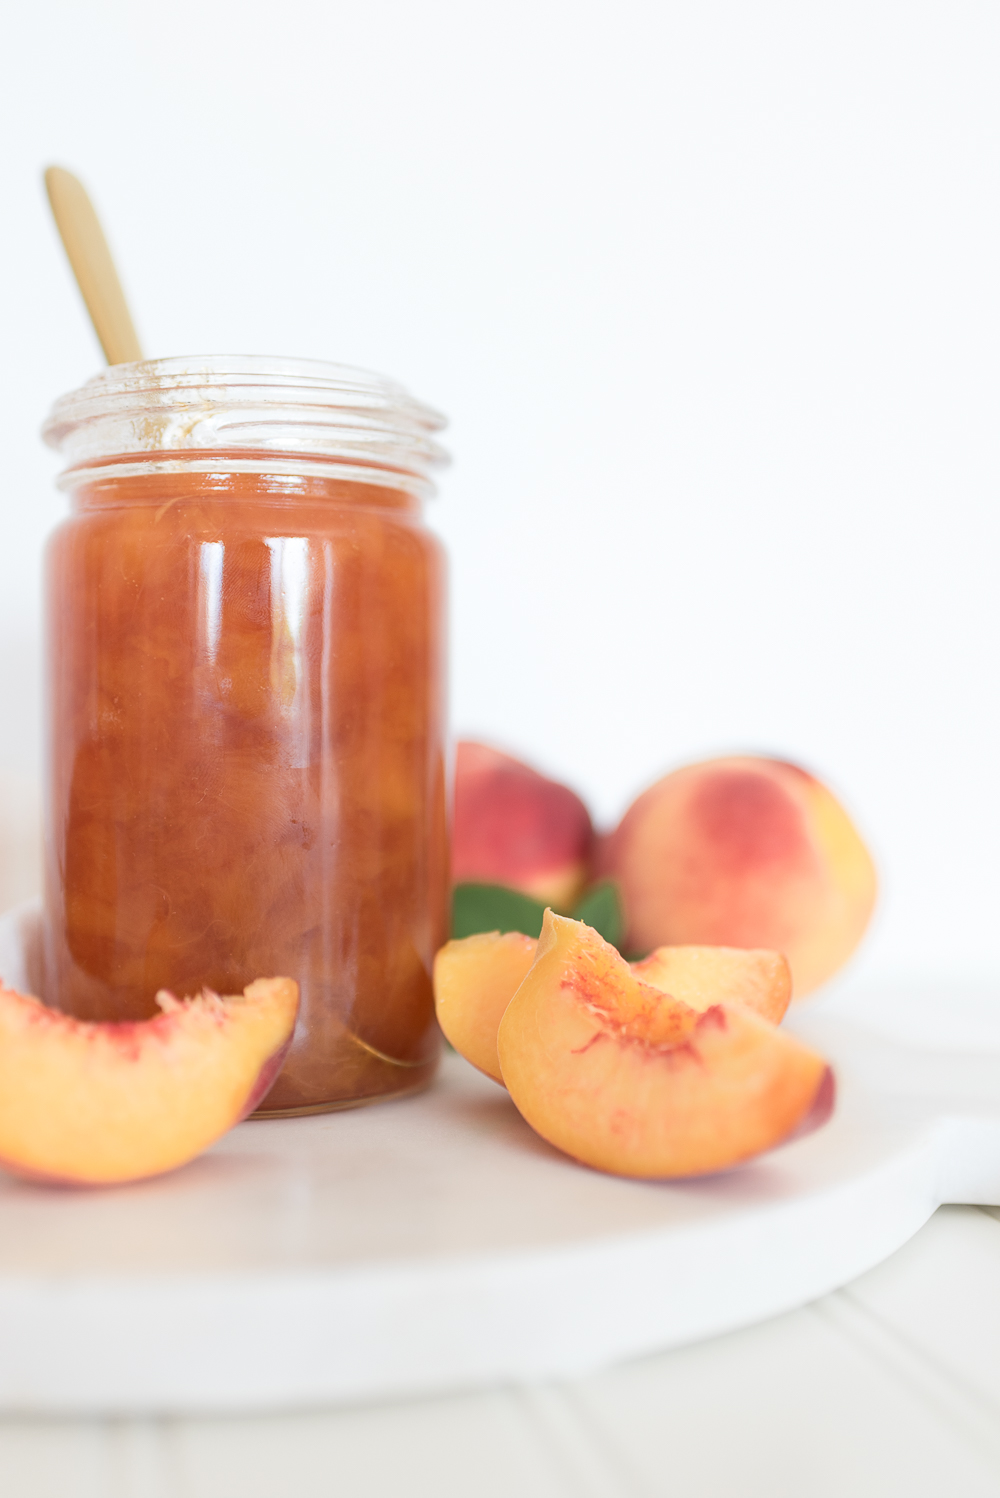 This small-batch peach jam recipe with a hint of spice is easy since it doesn't involve the traditional canning process.